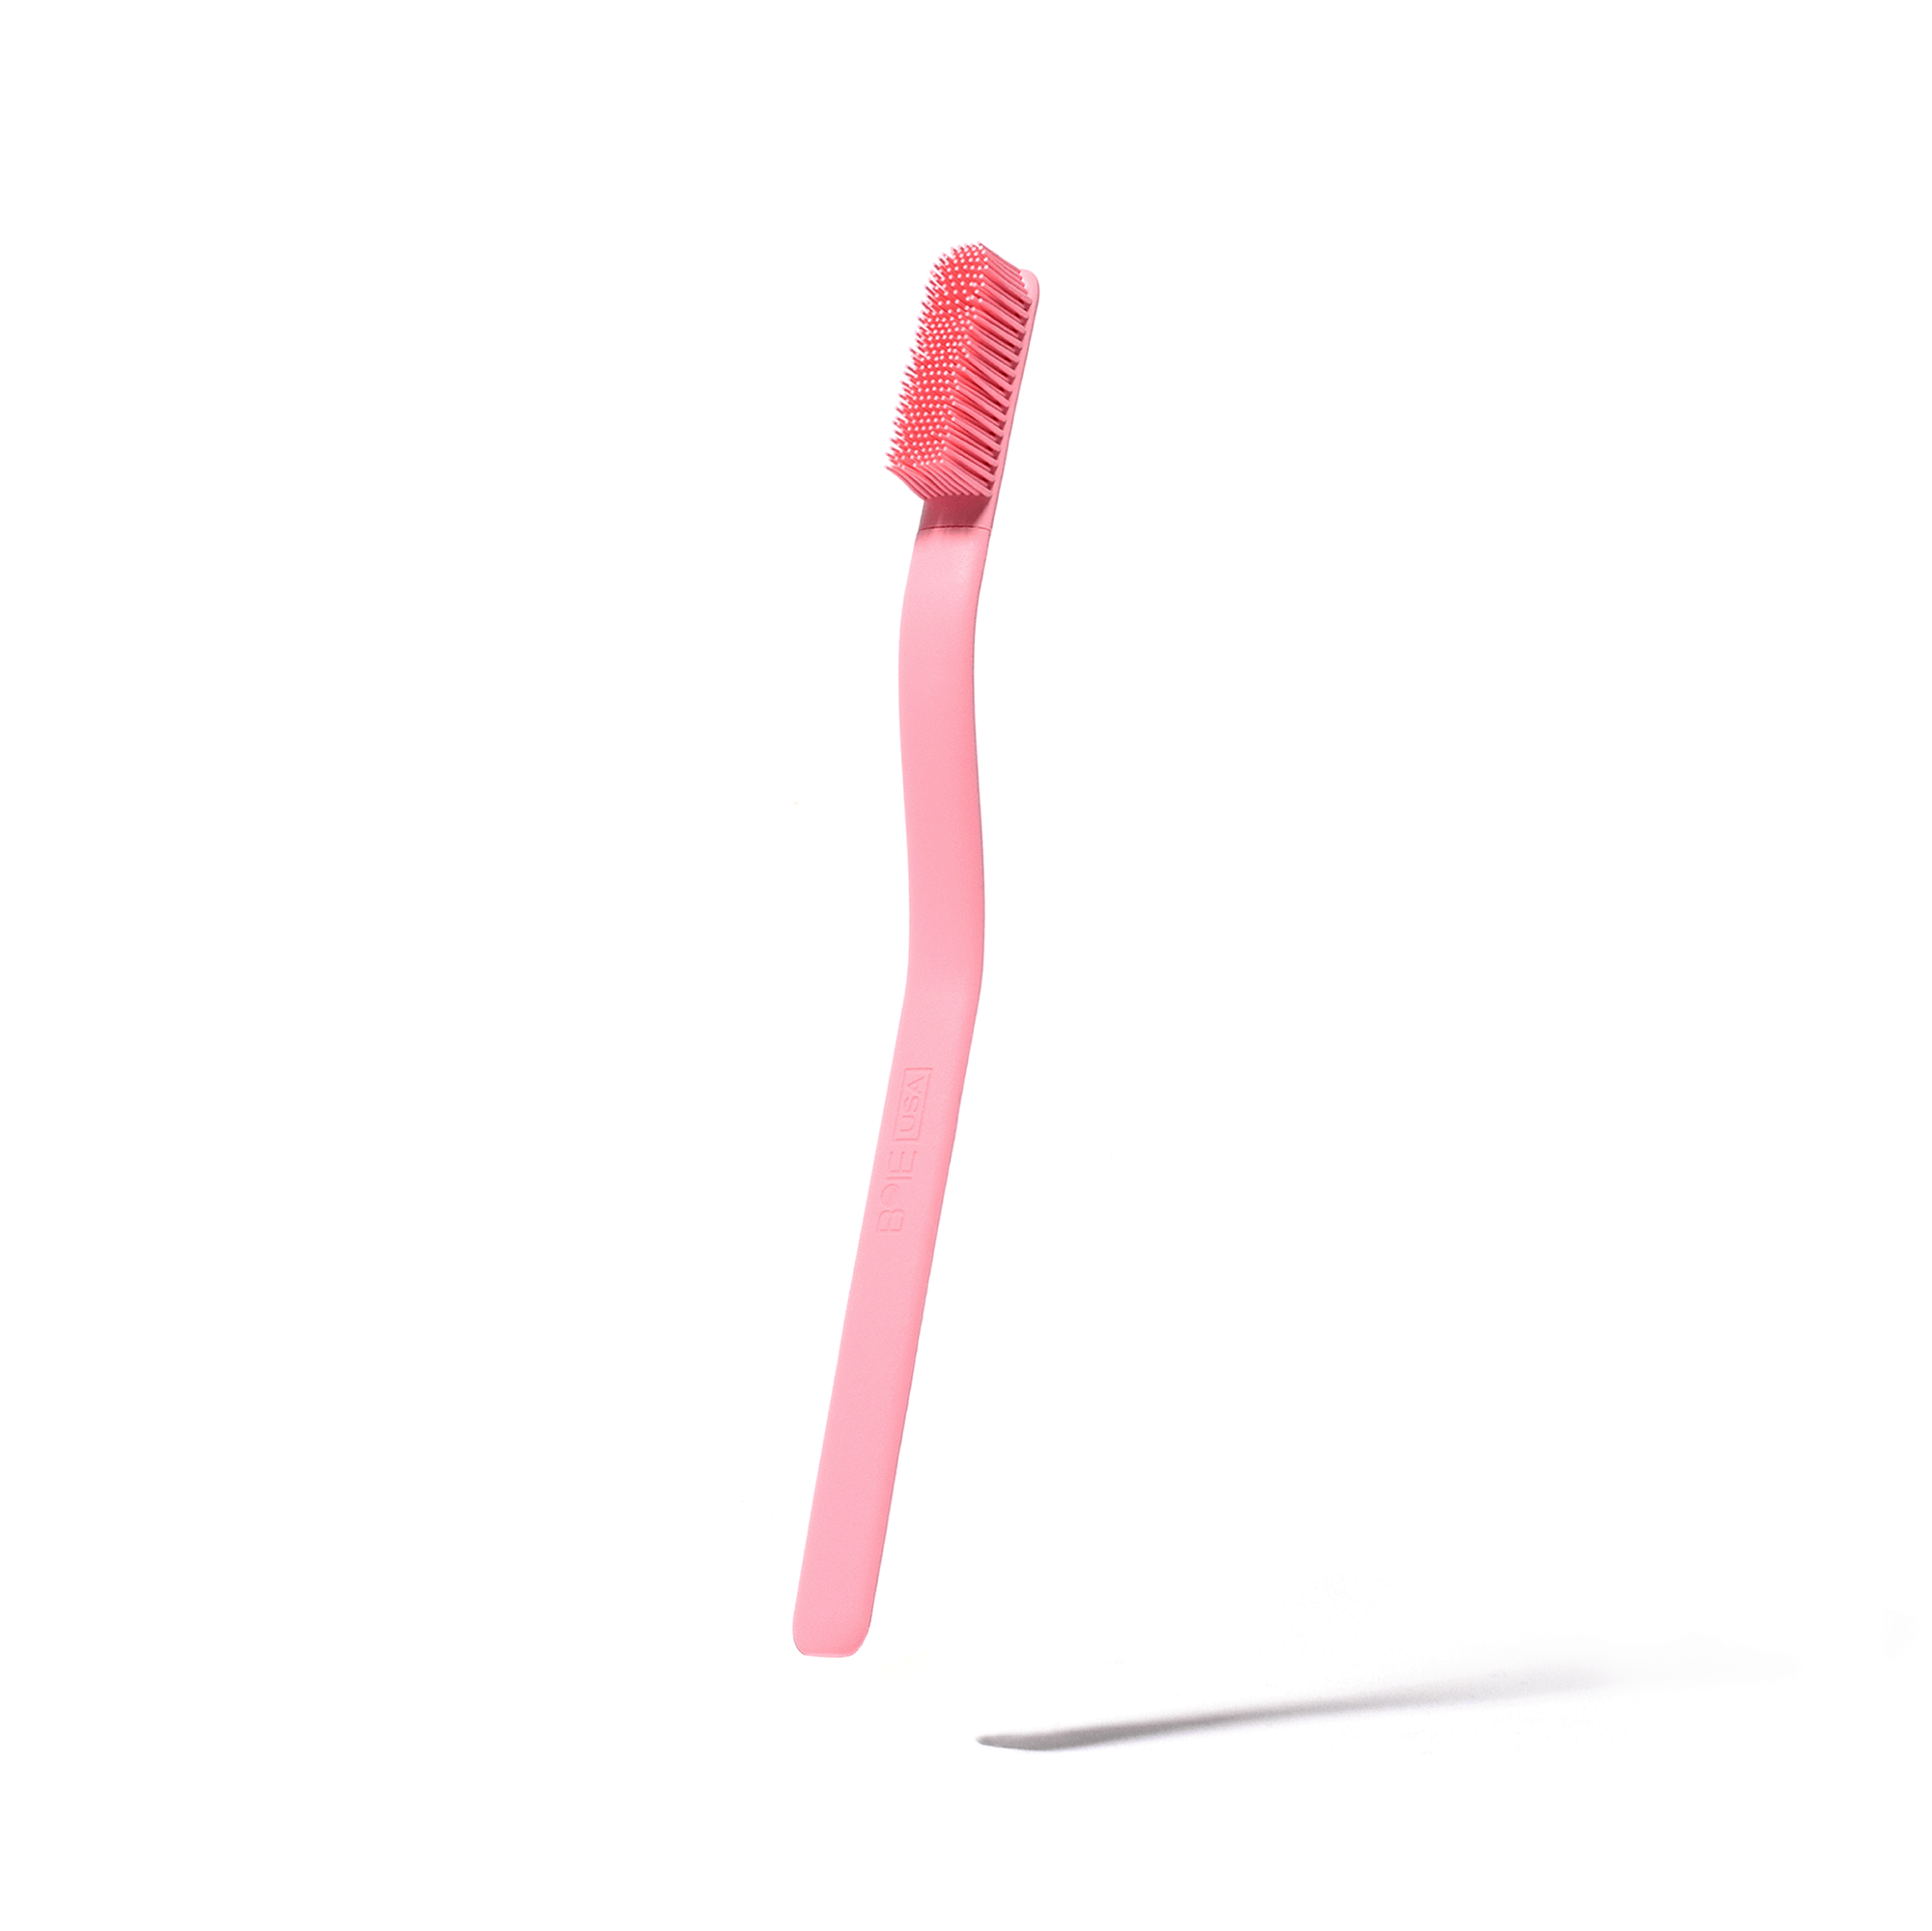 pink-toothrbrush-resized_cb3bb11e-3f51-4f43-bfd6-6ac655e1f23a_2000x.png